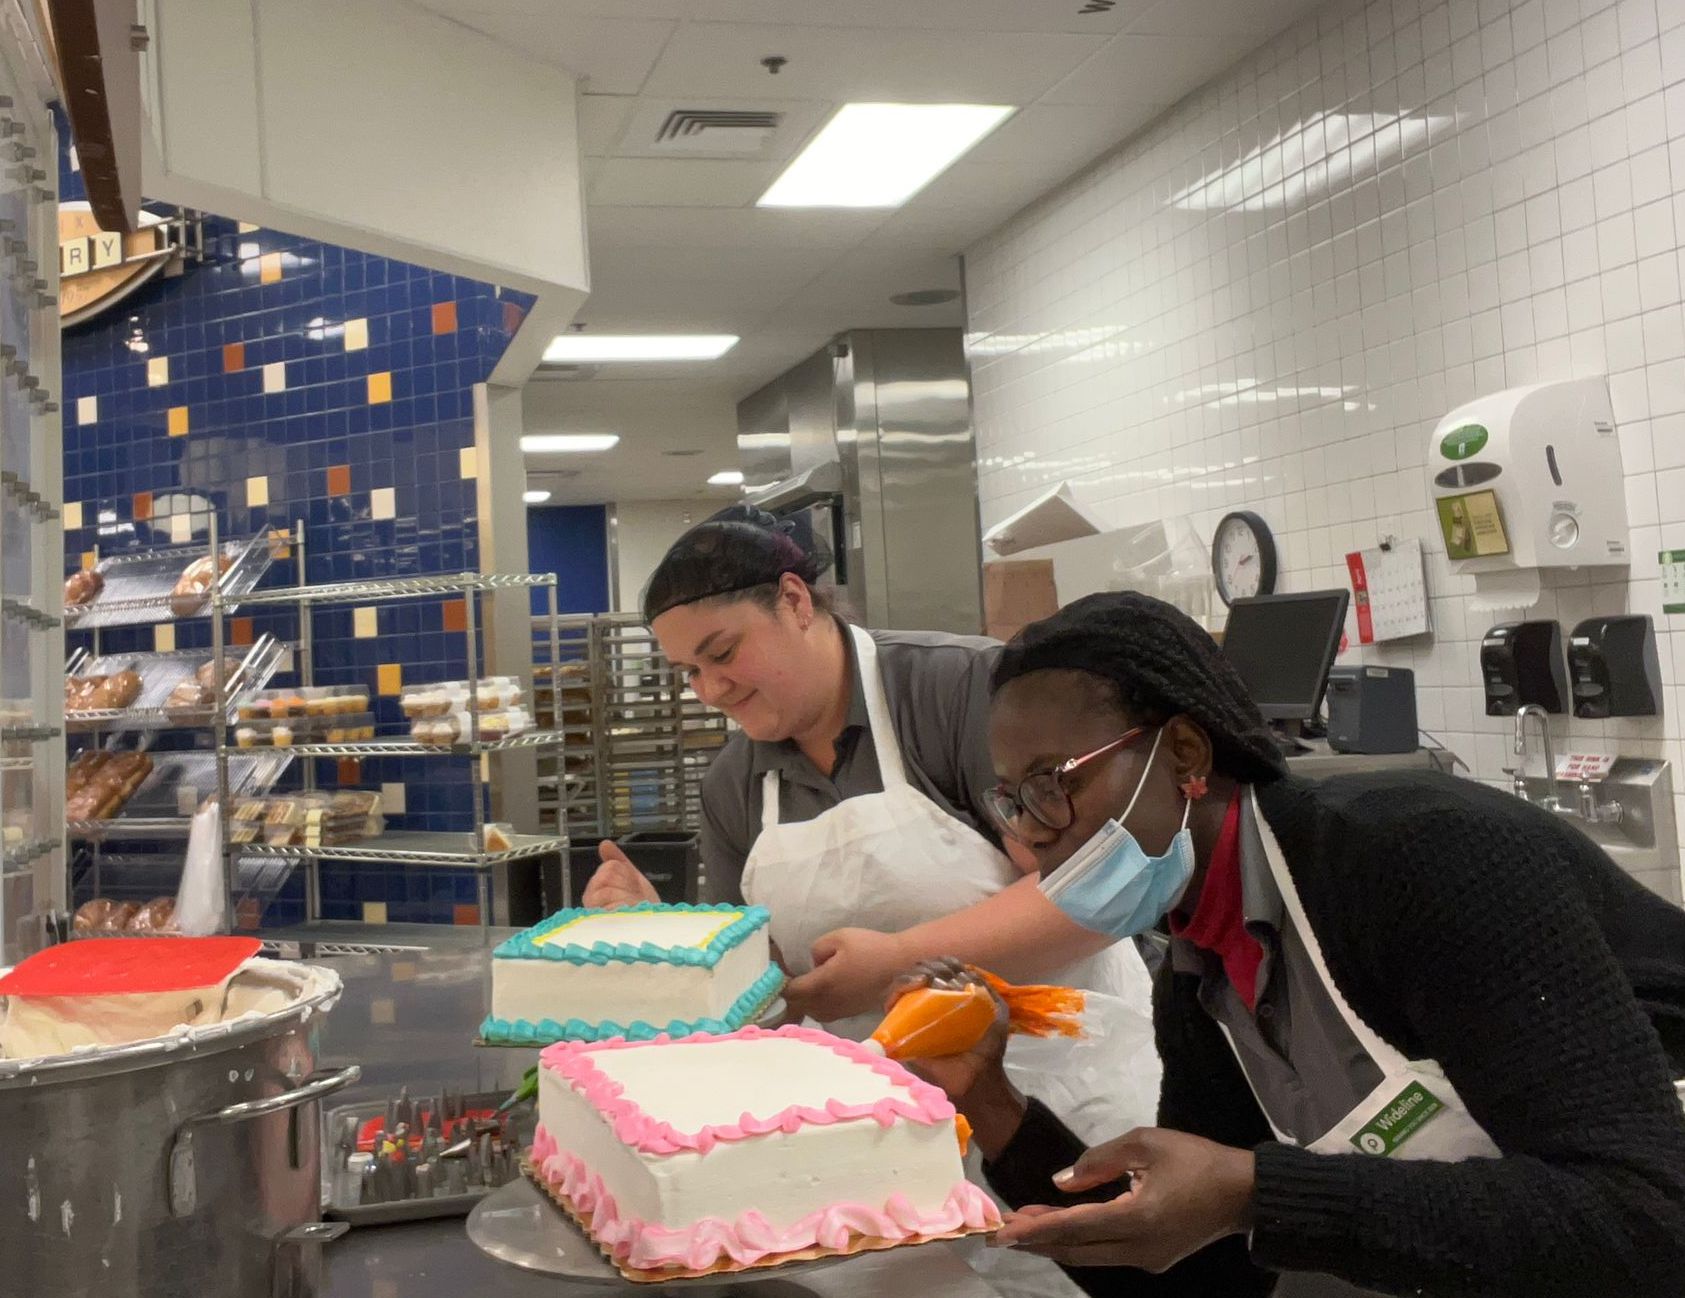 Two women decorating cakes with icing bags in a commercial kitchen.